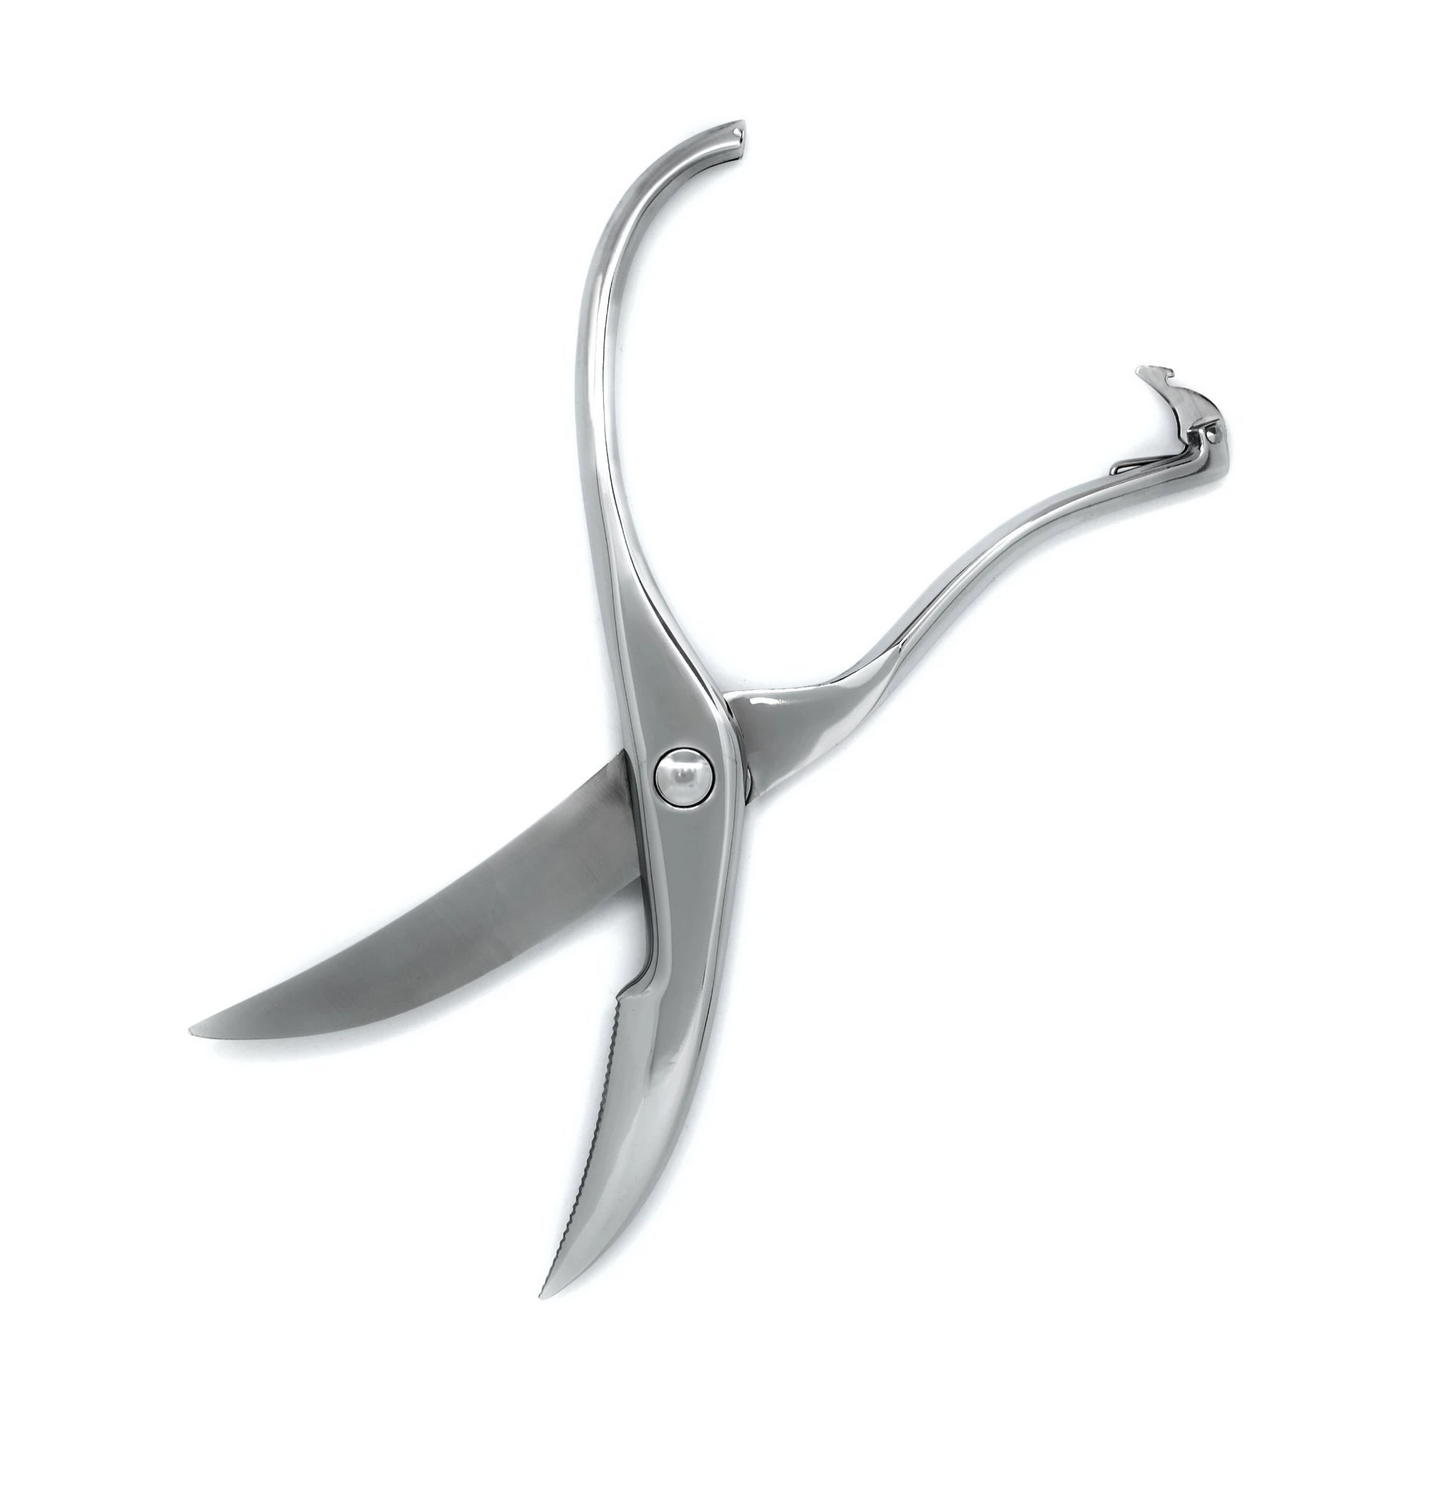 IC Design Campi Re-Edition Poultry Shears